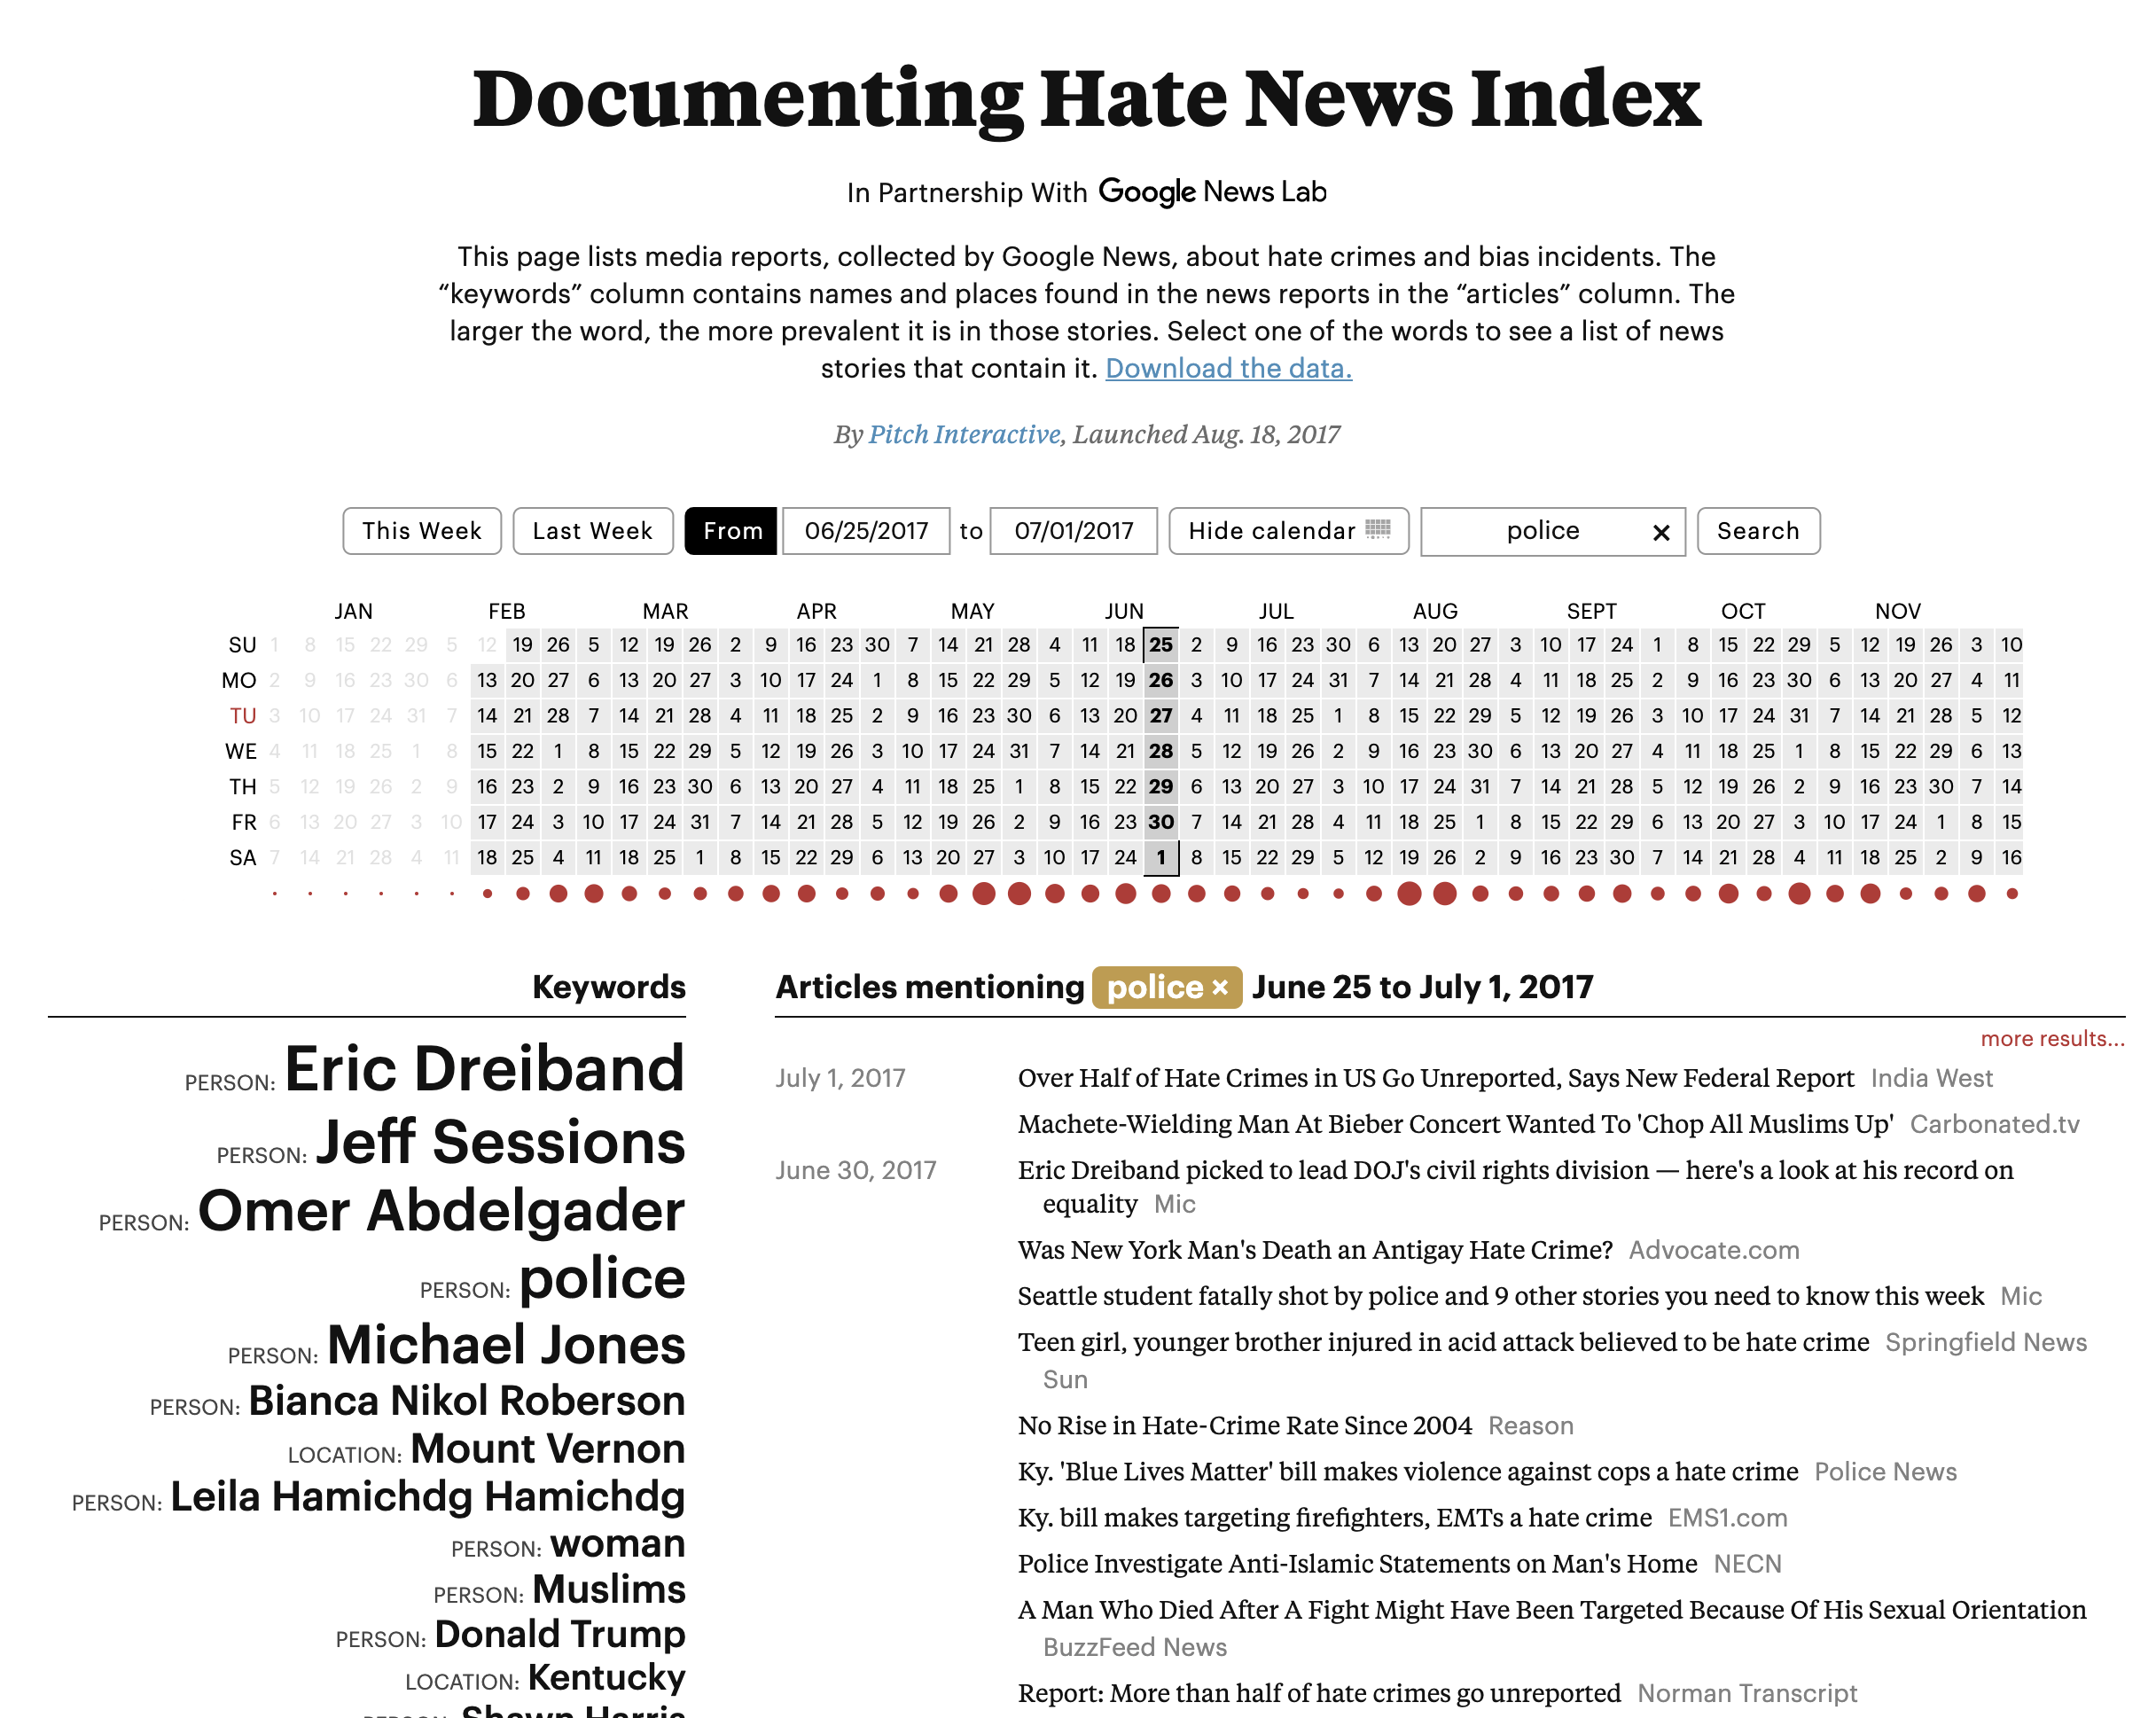 Documenting Hate News Index #3